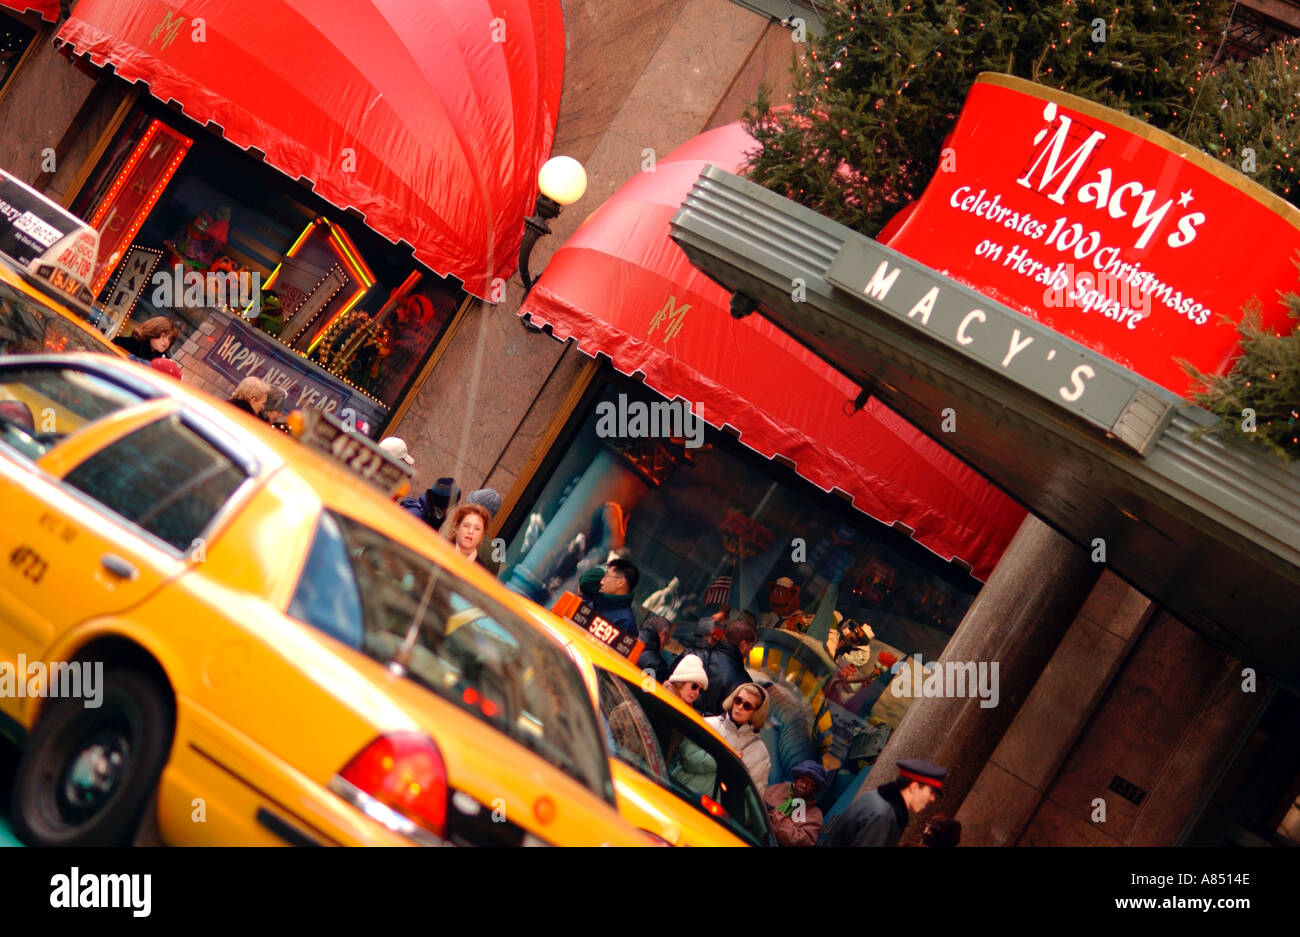 Macy's Store Exterior & Cabs, Day Stock Photo